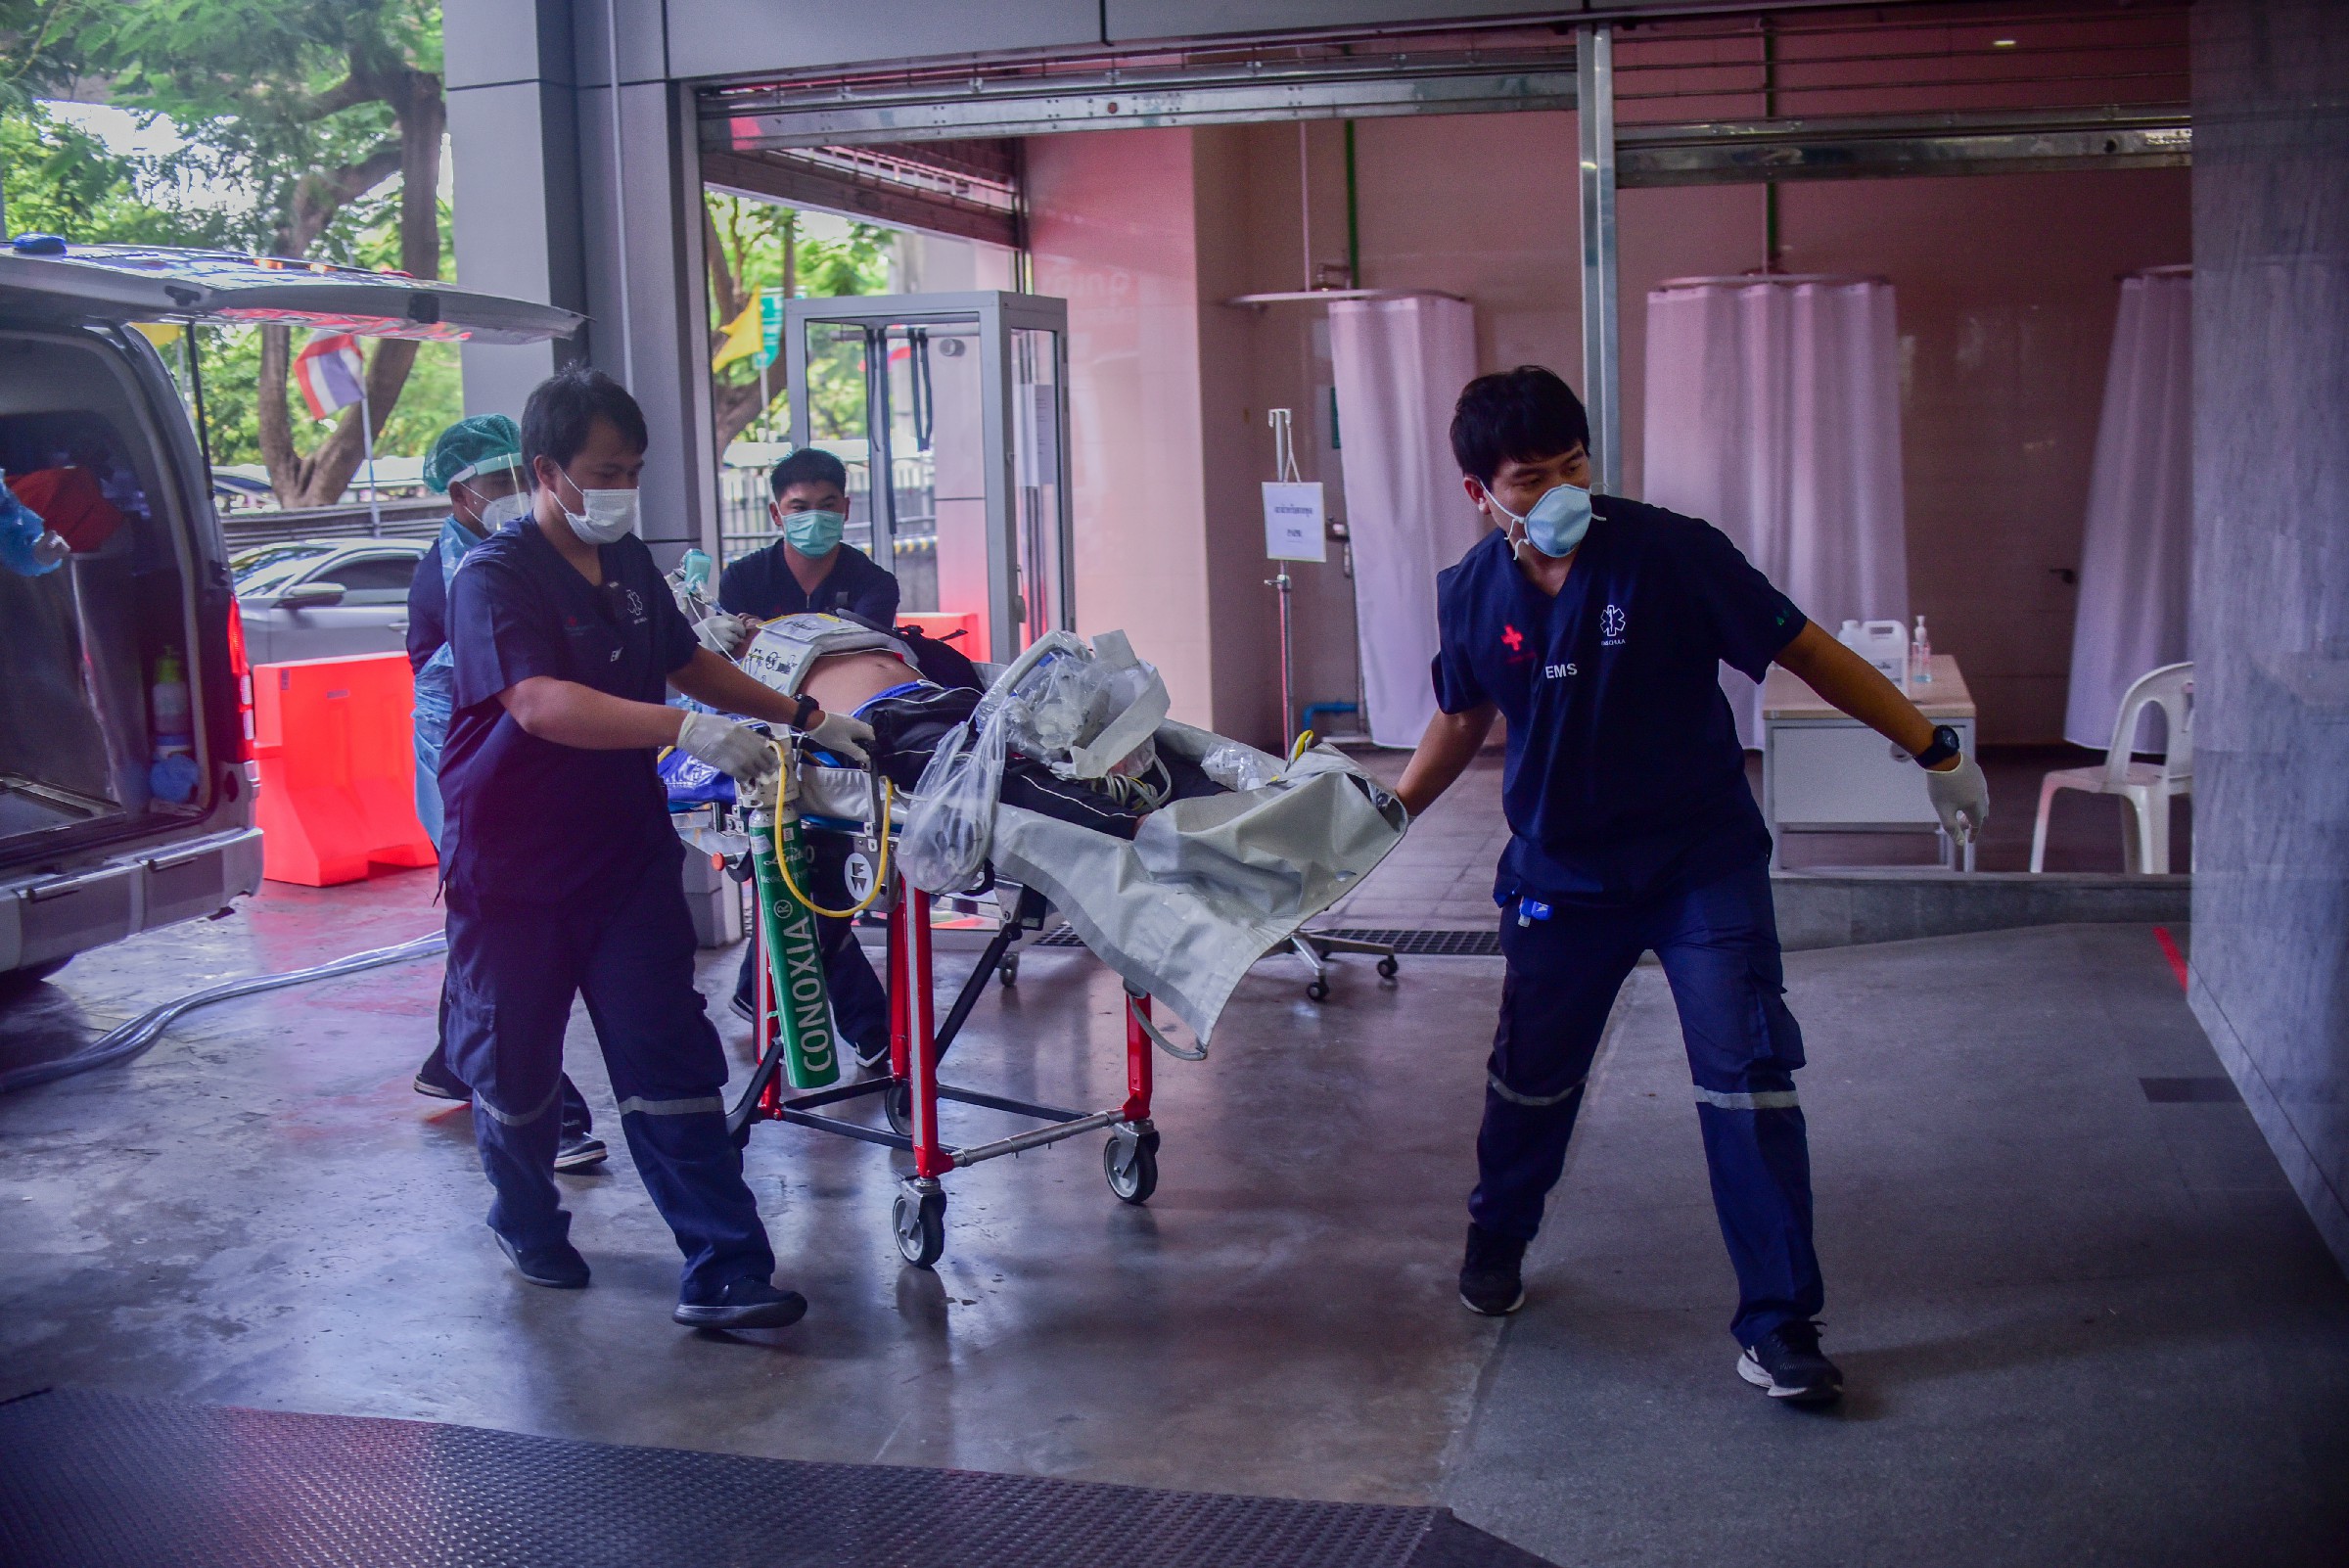 Injured Tourist Dies After Private Hospital Denies Treatment Over Payment Concerns